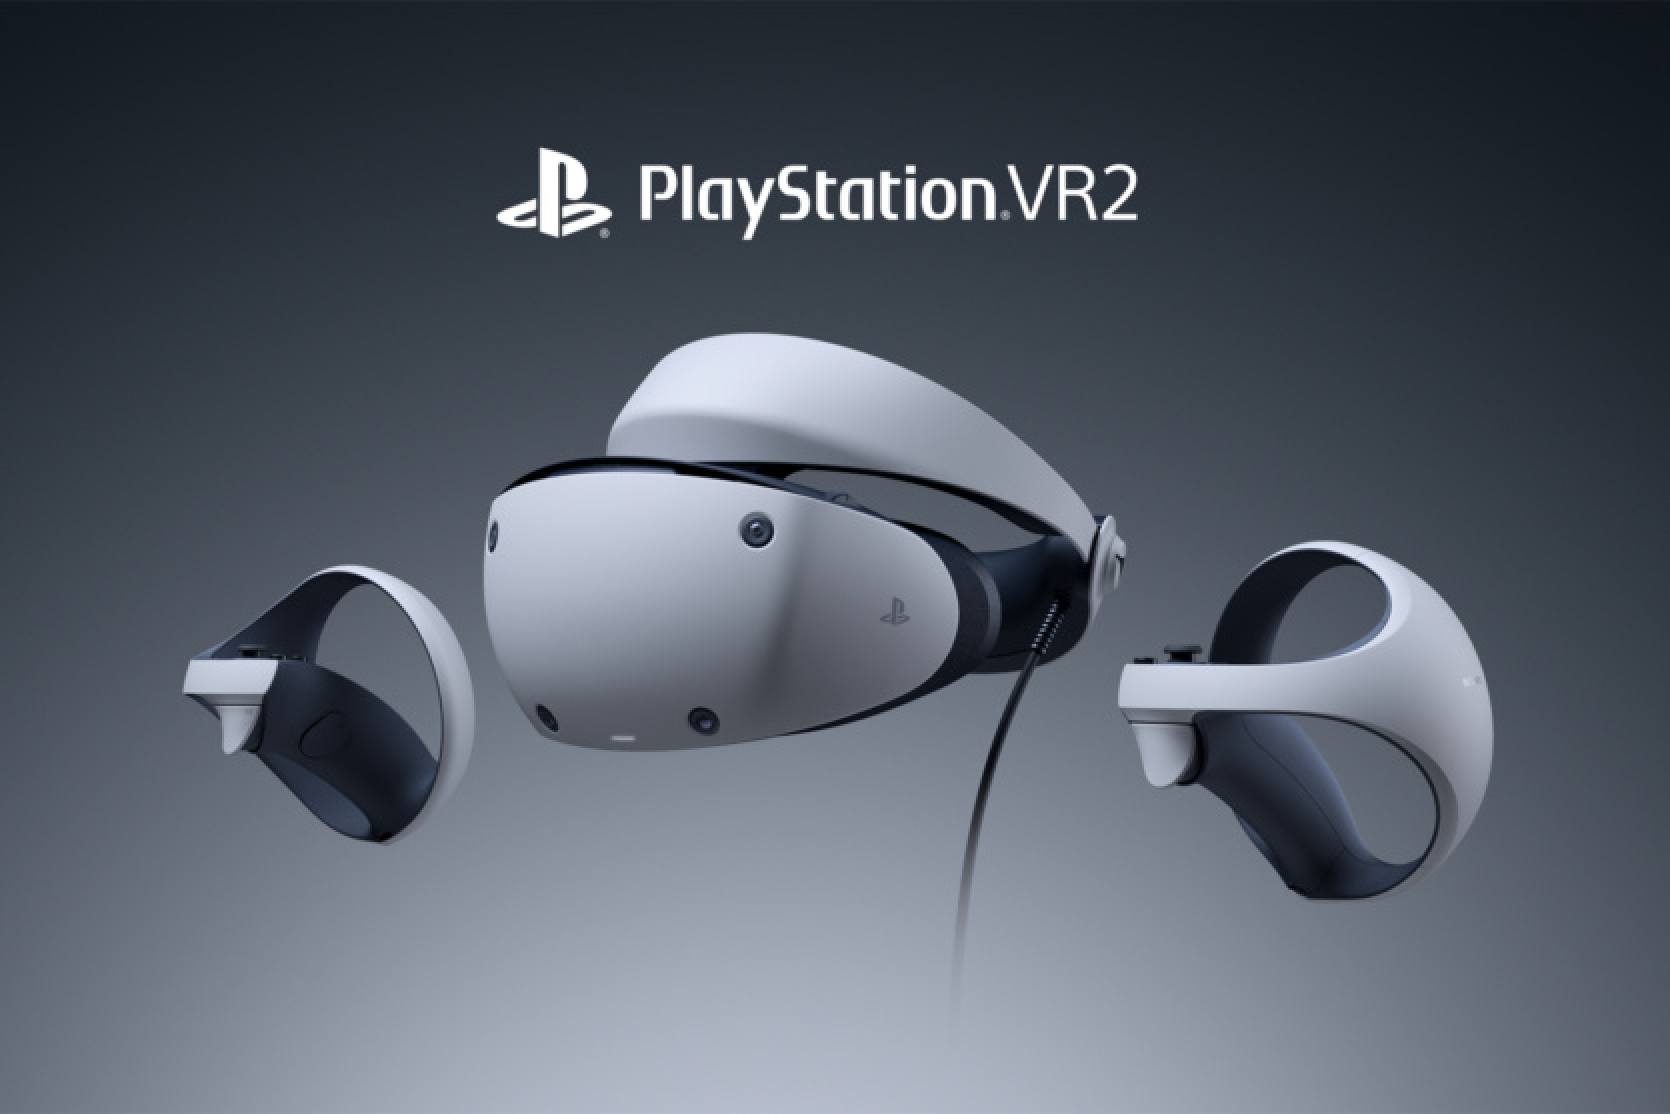 Demand is falling and inventories are rising. Sony halted production of PS VR2